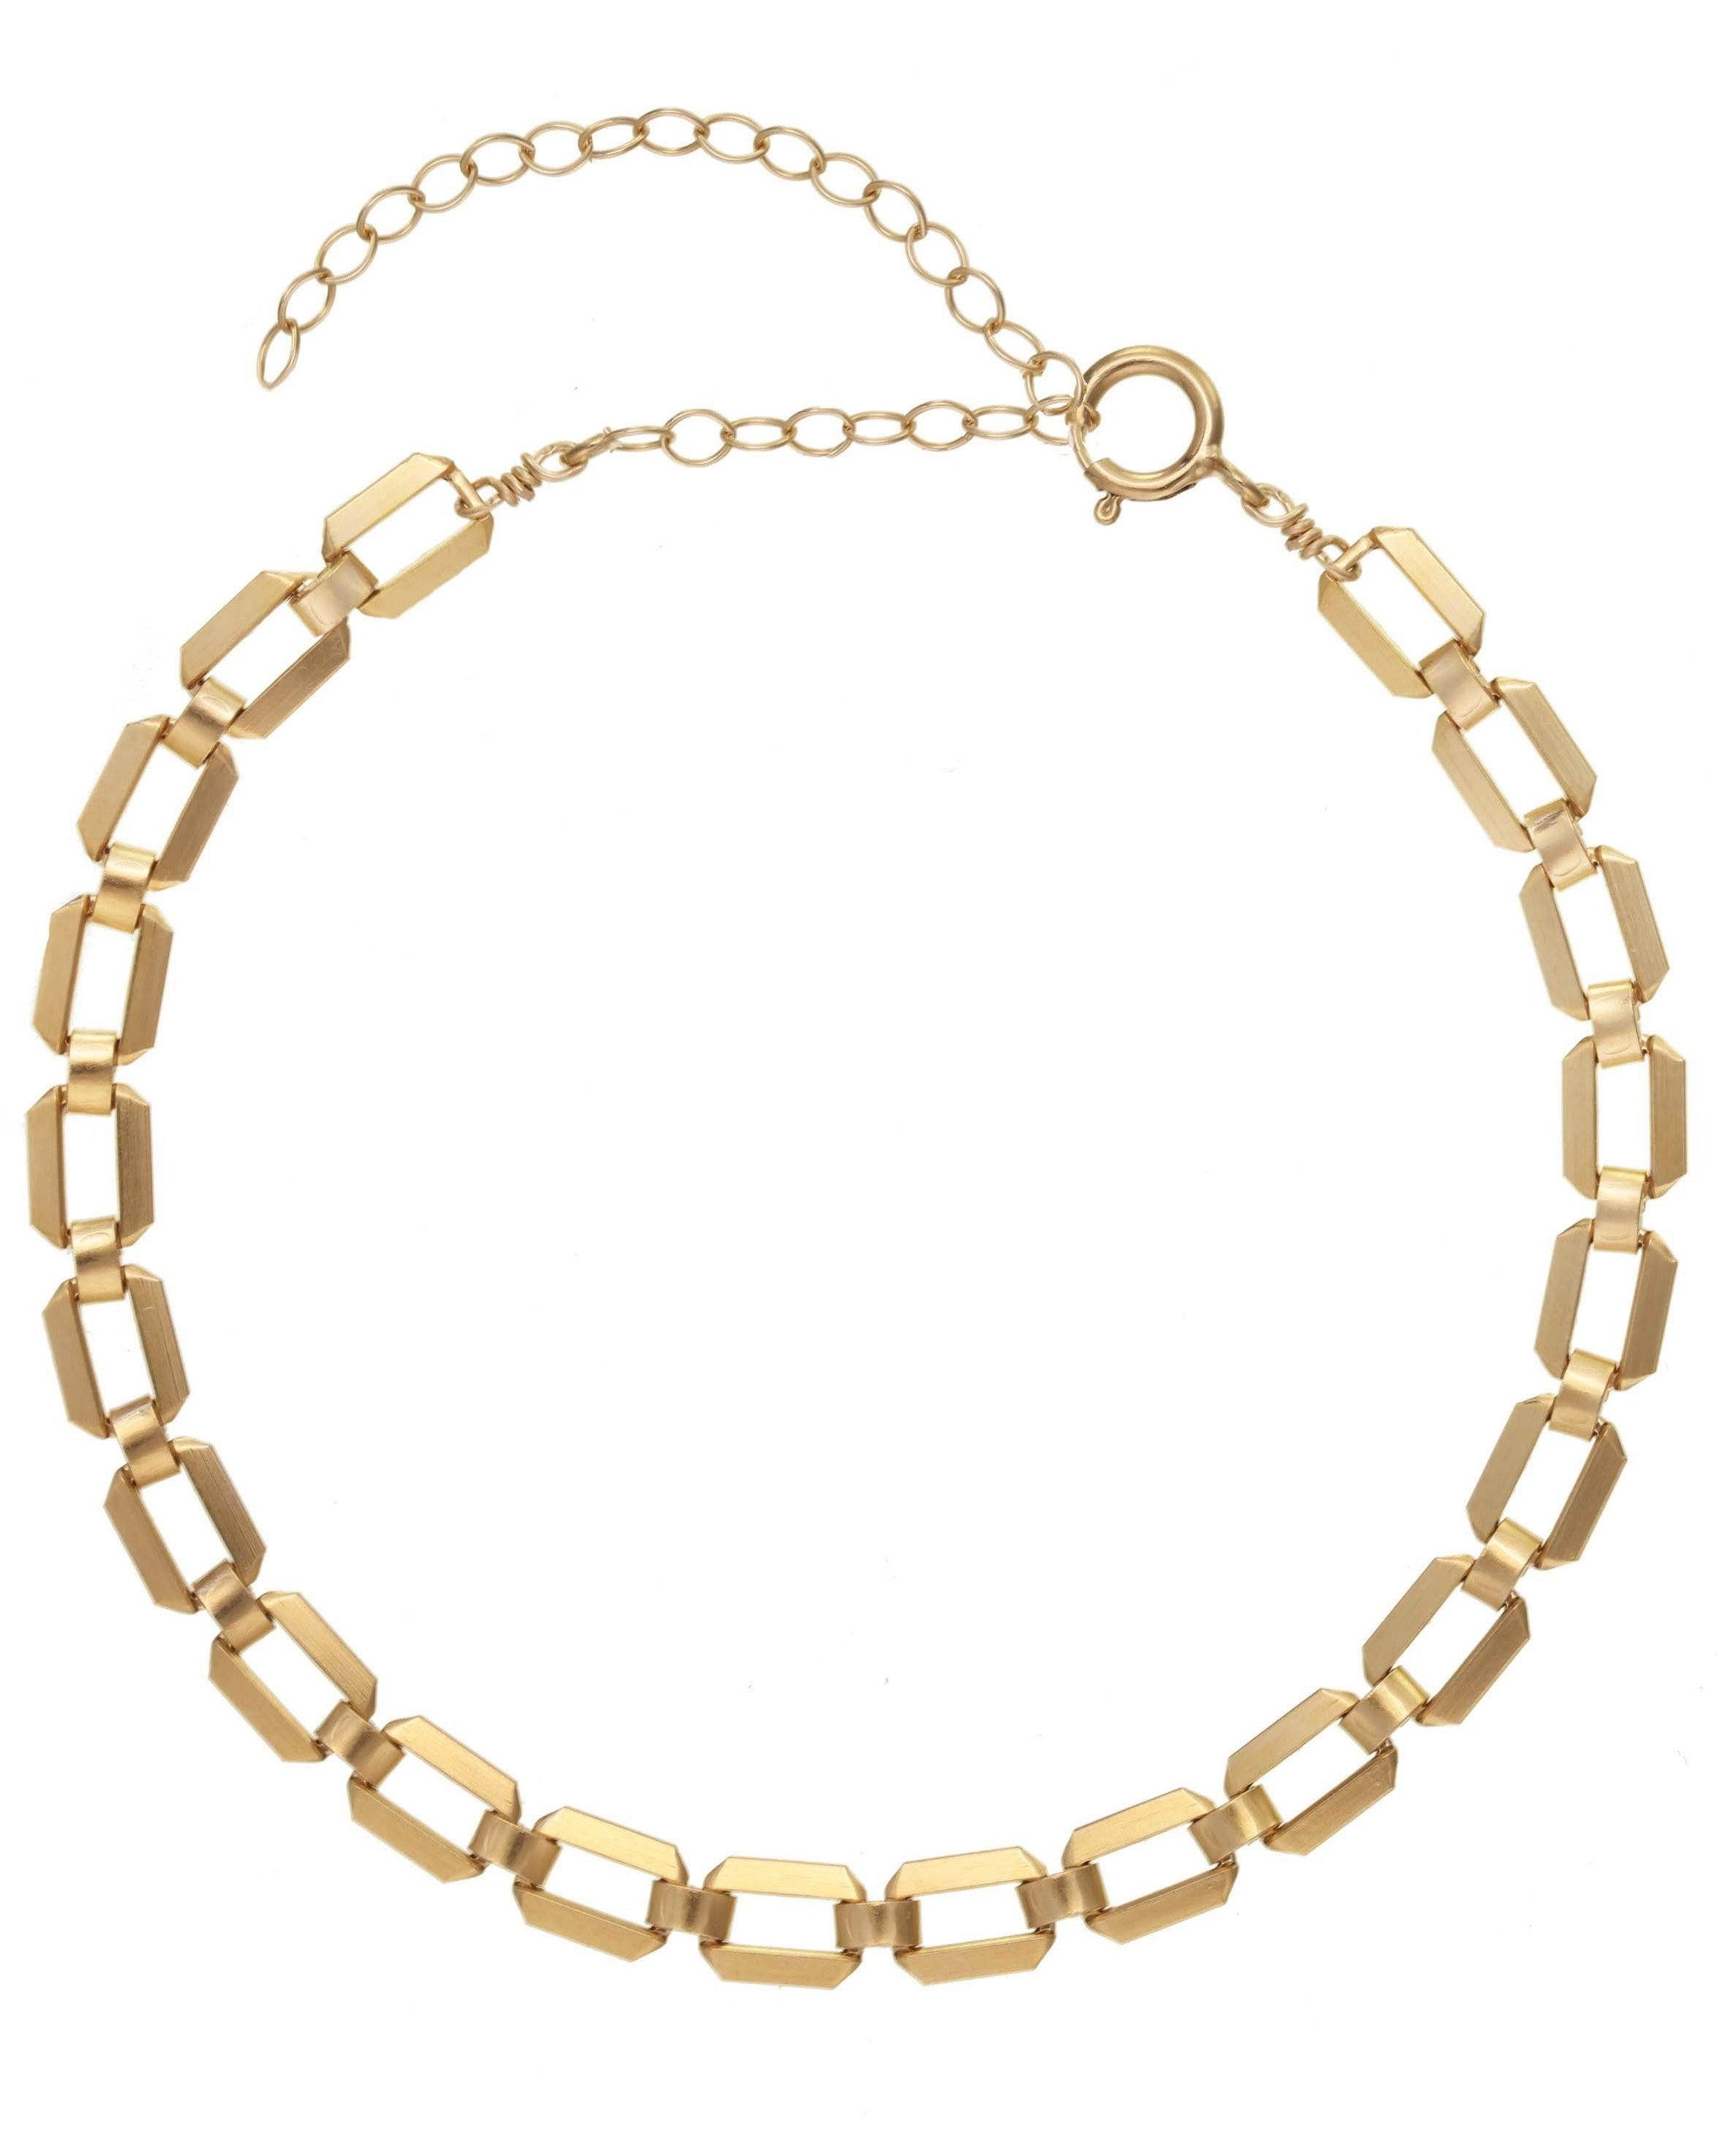 Carti Bracelet by KOZAKH. A 6 to 7 inch adjustable length chain bracelet, crafted in 14K Gold Filled.